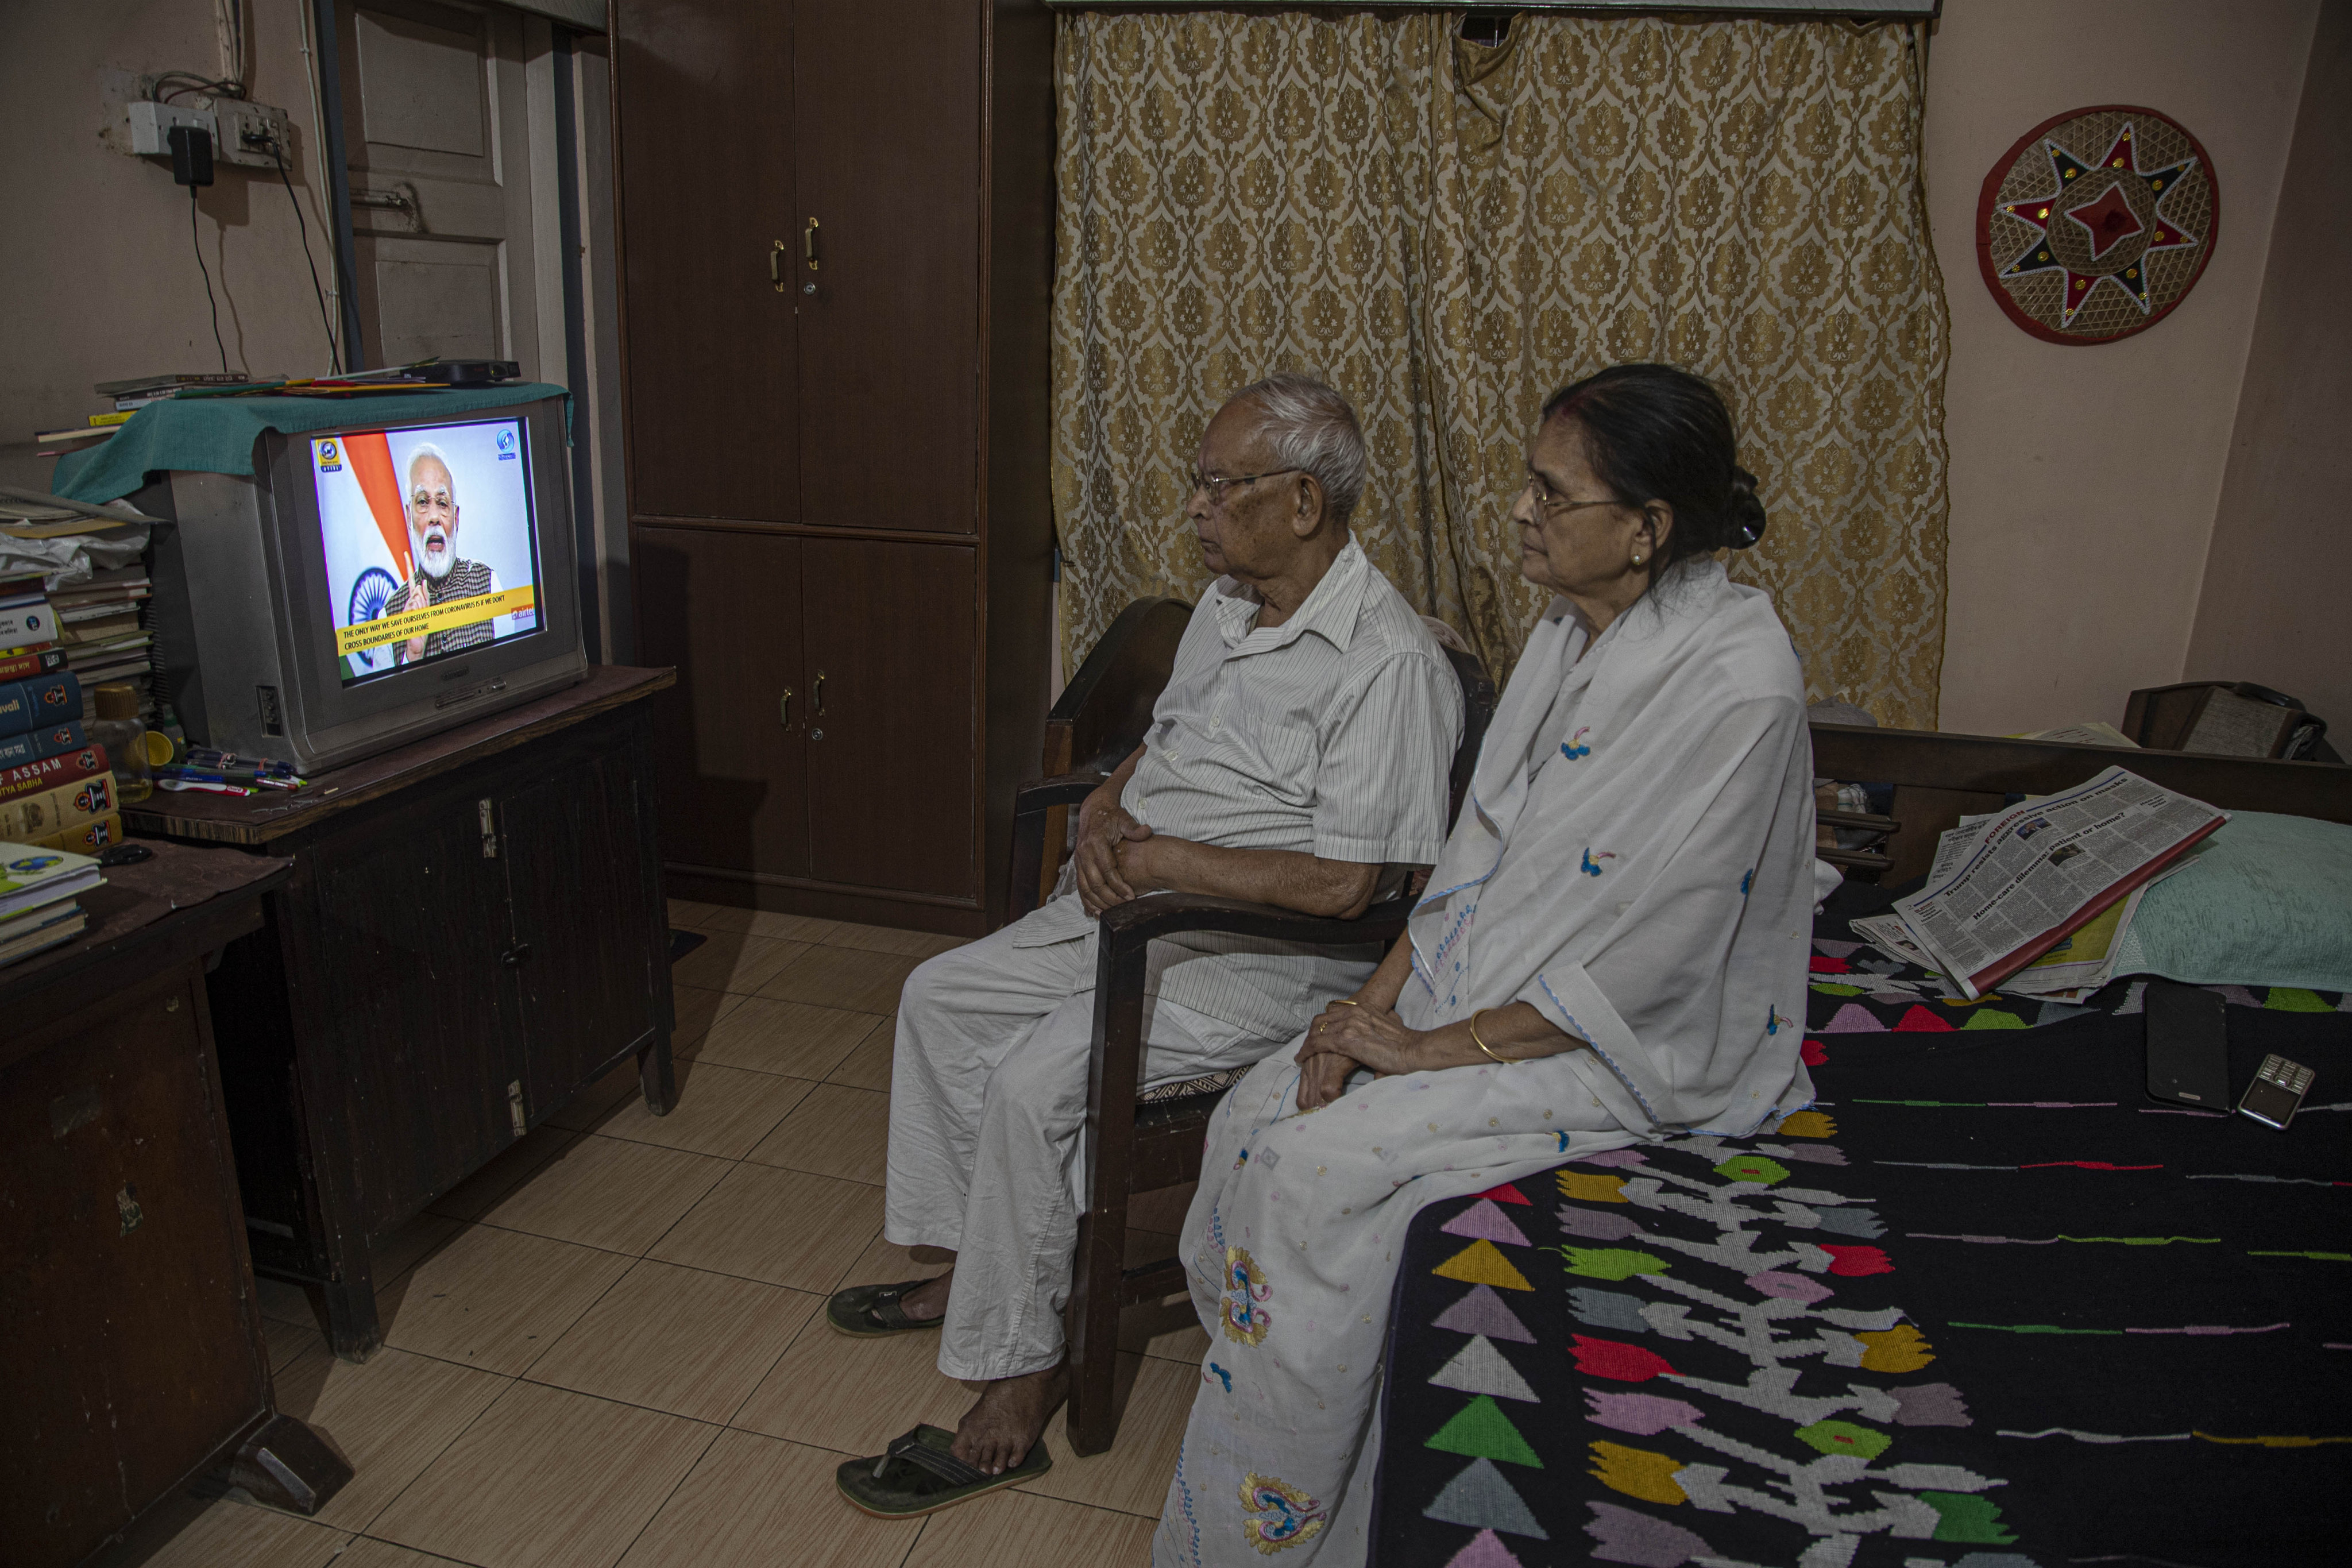 An elderly Indian couple watch TV together. Increasing numbers of older Indians are deciding to divorce after many years together. File photo: AP